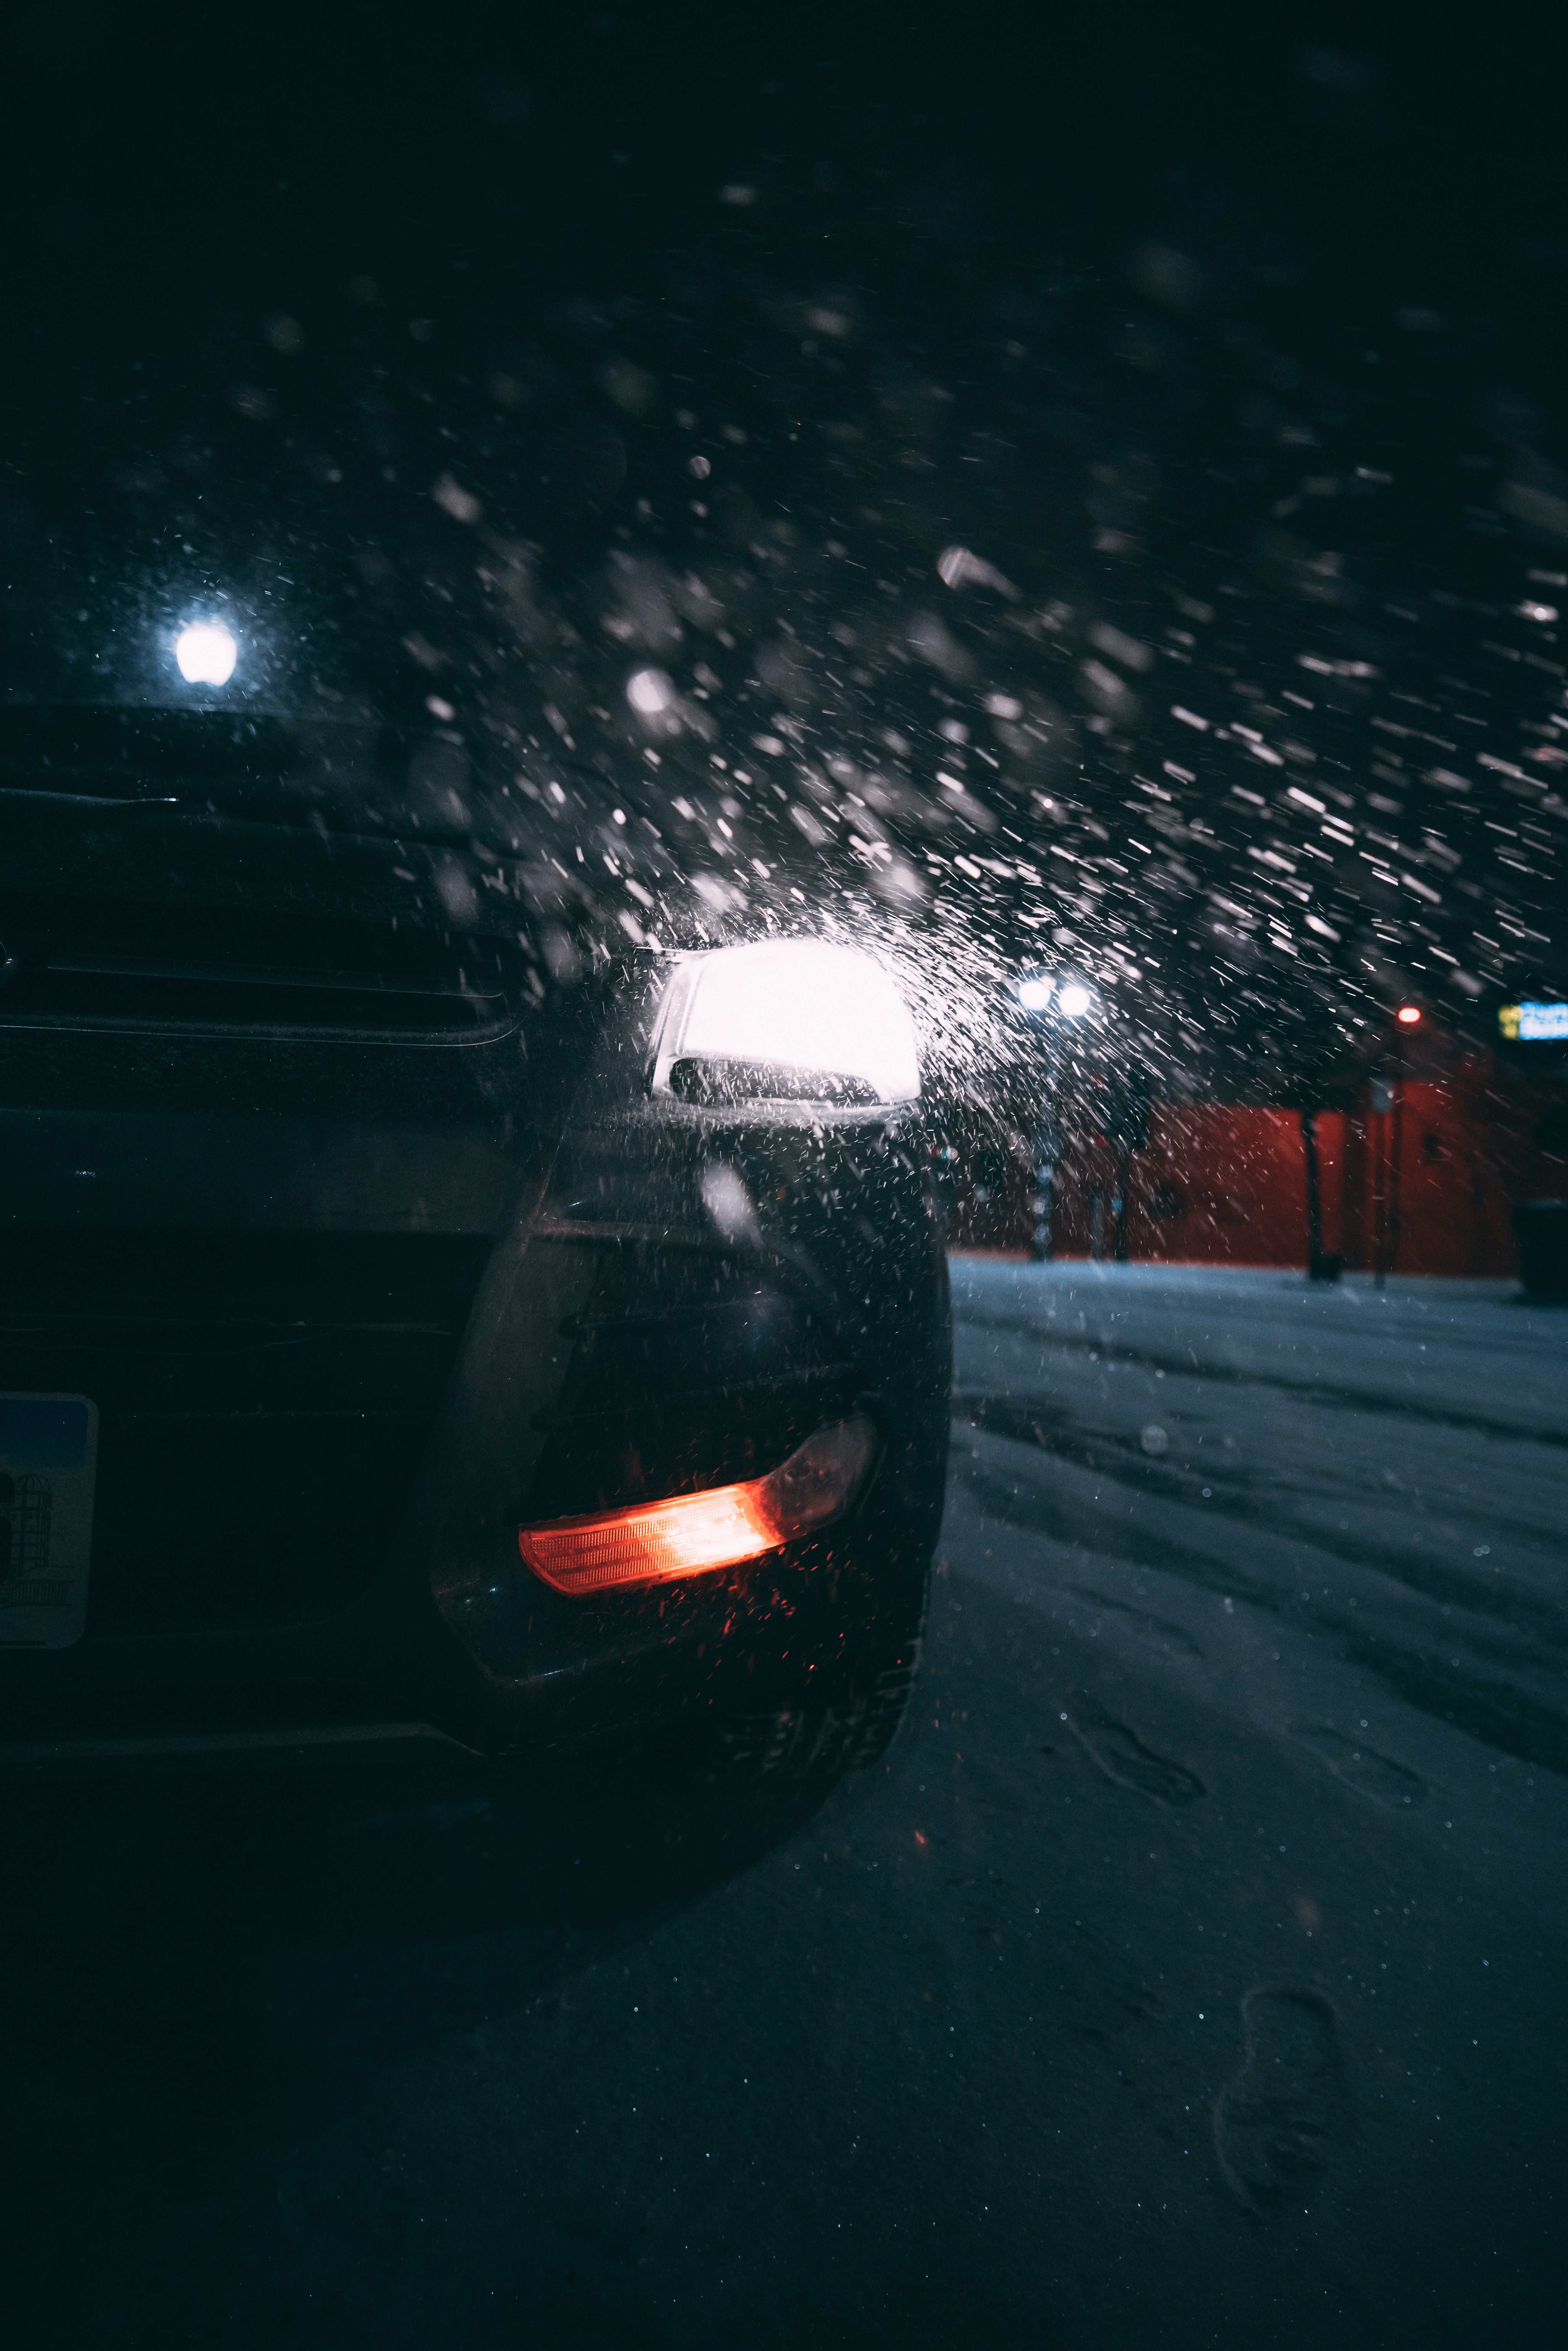 Download PC Wallpaper night, snow, cars, lights, car, back view, rear view, headlights